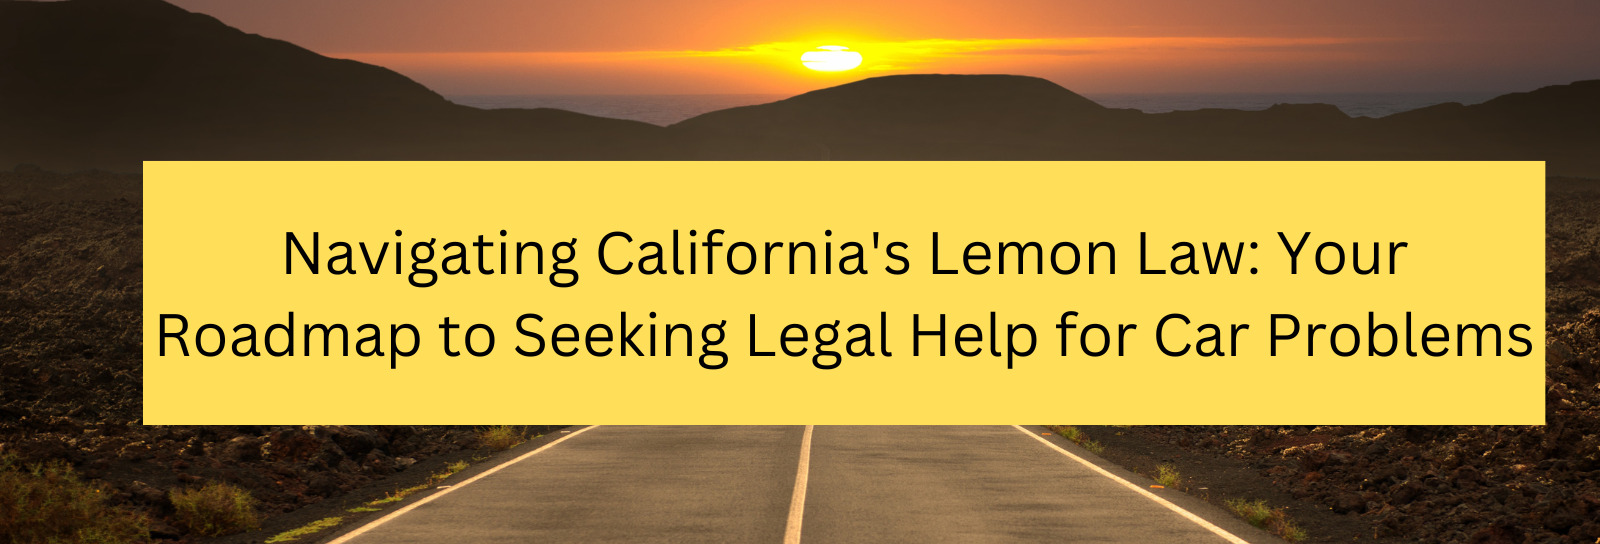 Navigating California’s Lemon Law: Your Roadmap to Seeking Legal Help for Car Problems